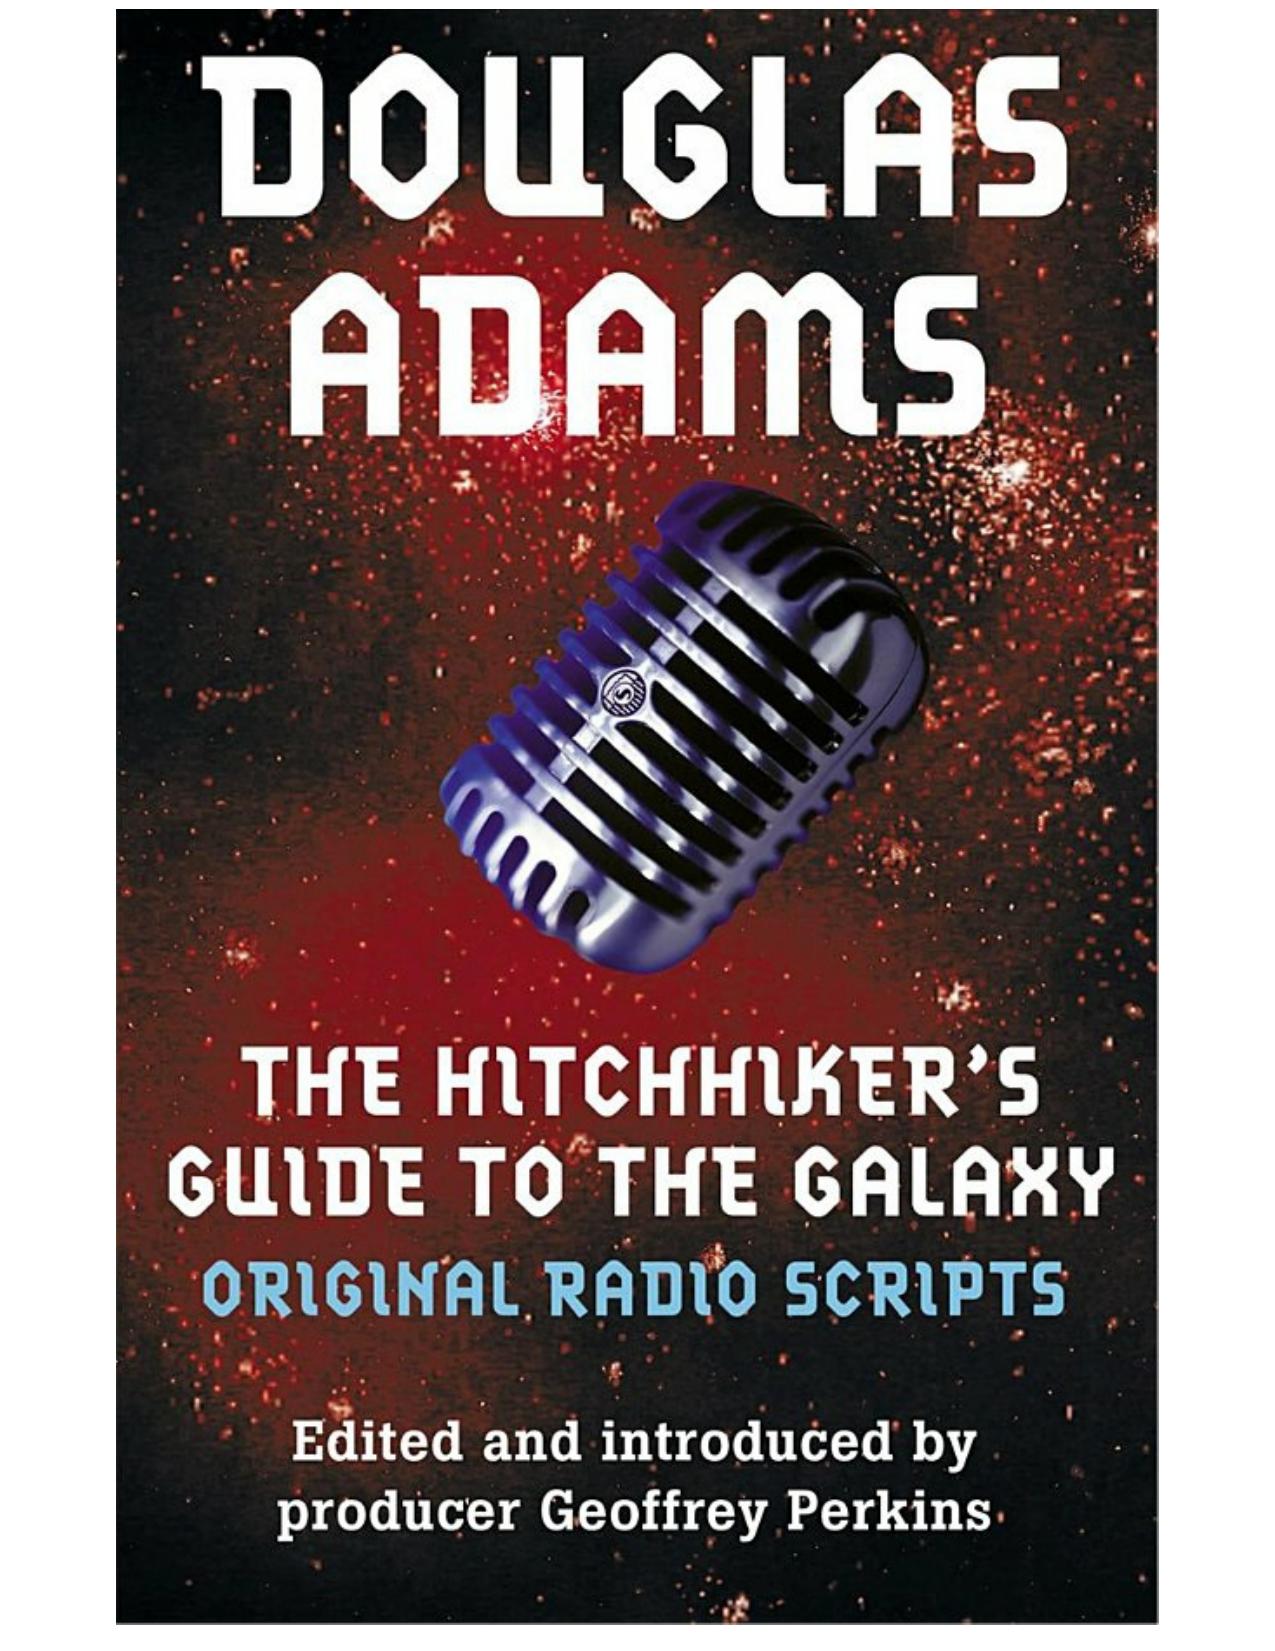 The Hitchhiker’s Guide to the Galaxy: The Original Radio Scripts by Douglas Adams